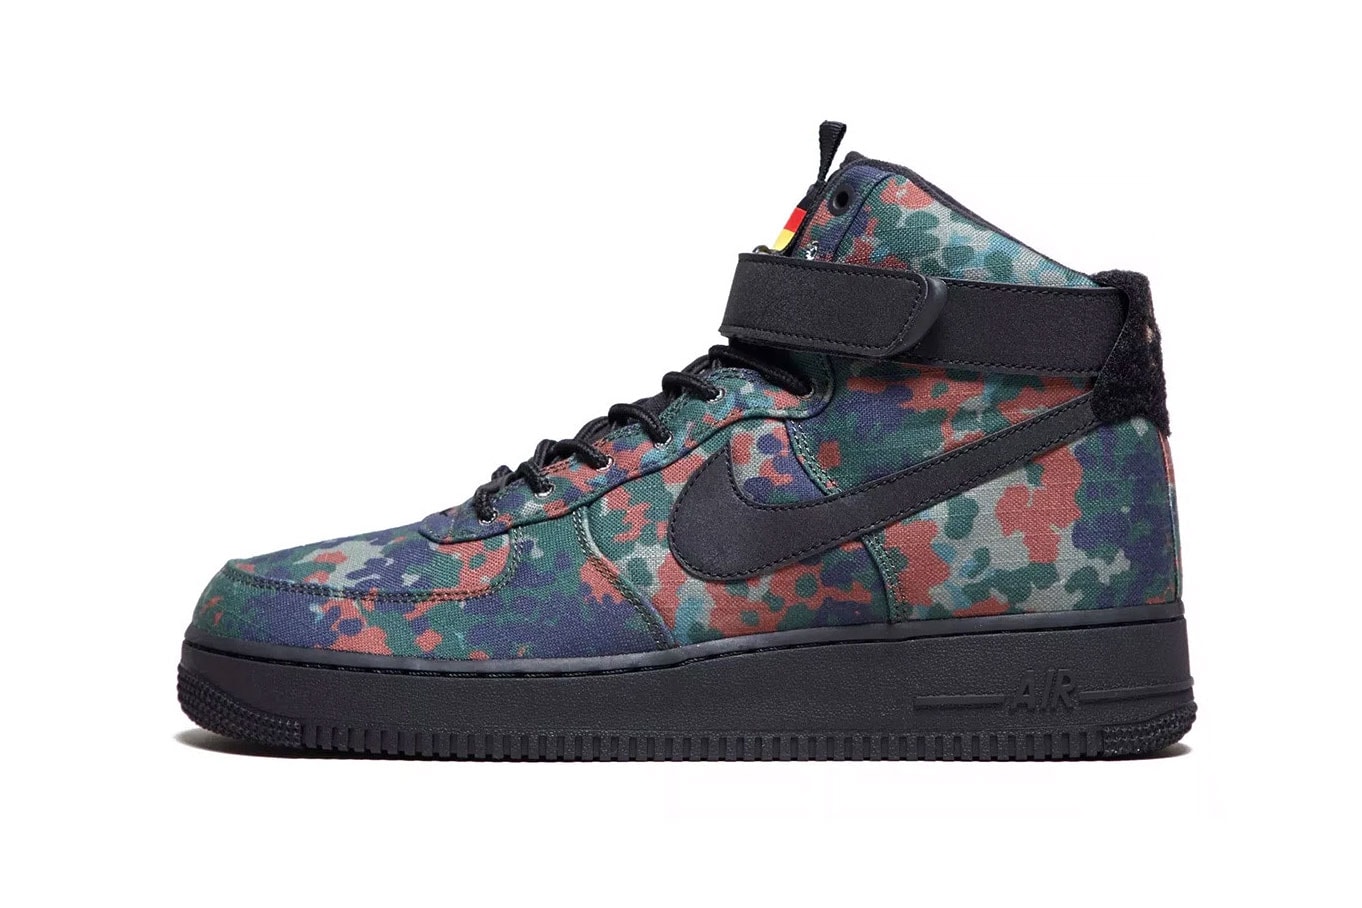 Nike Air Force 1 High Country Camo Germany release date 